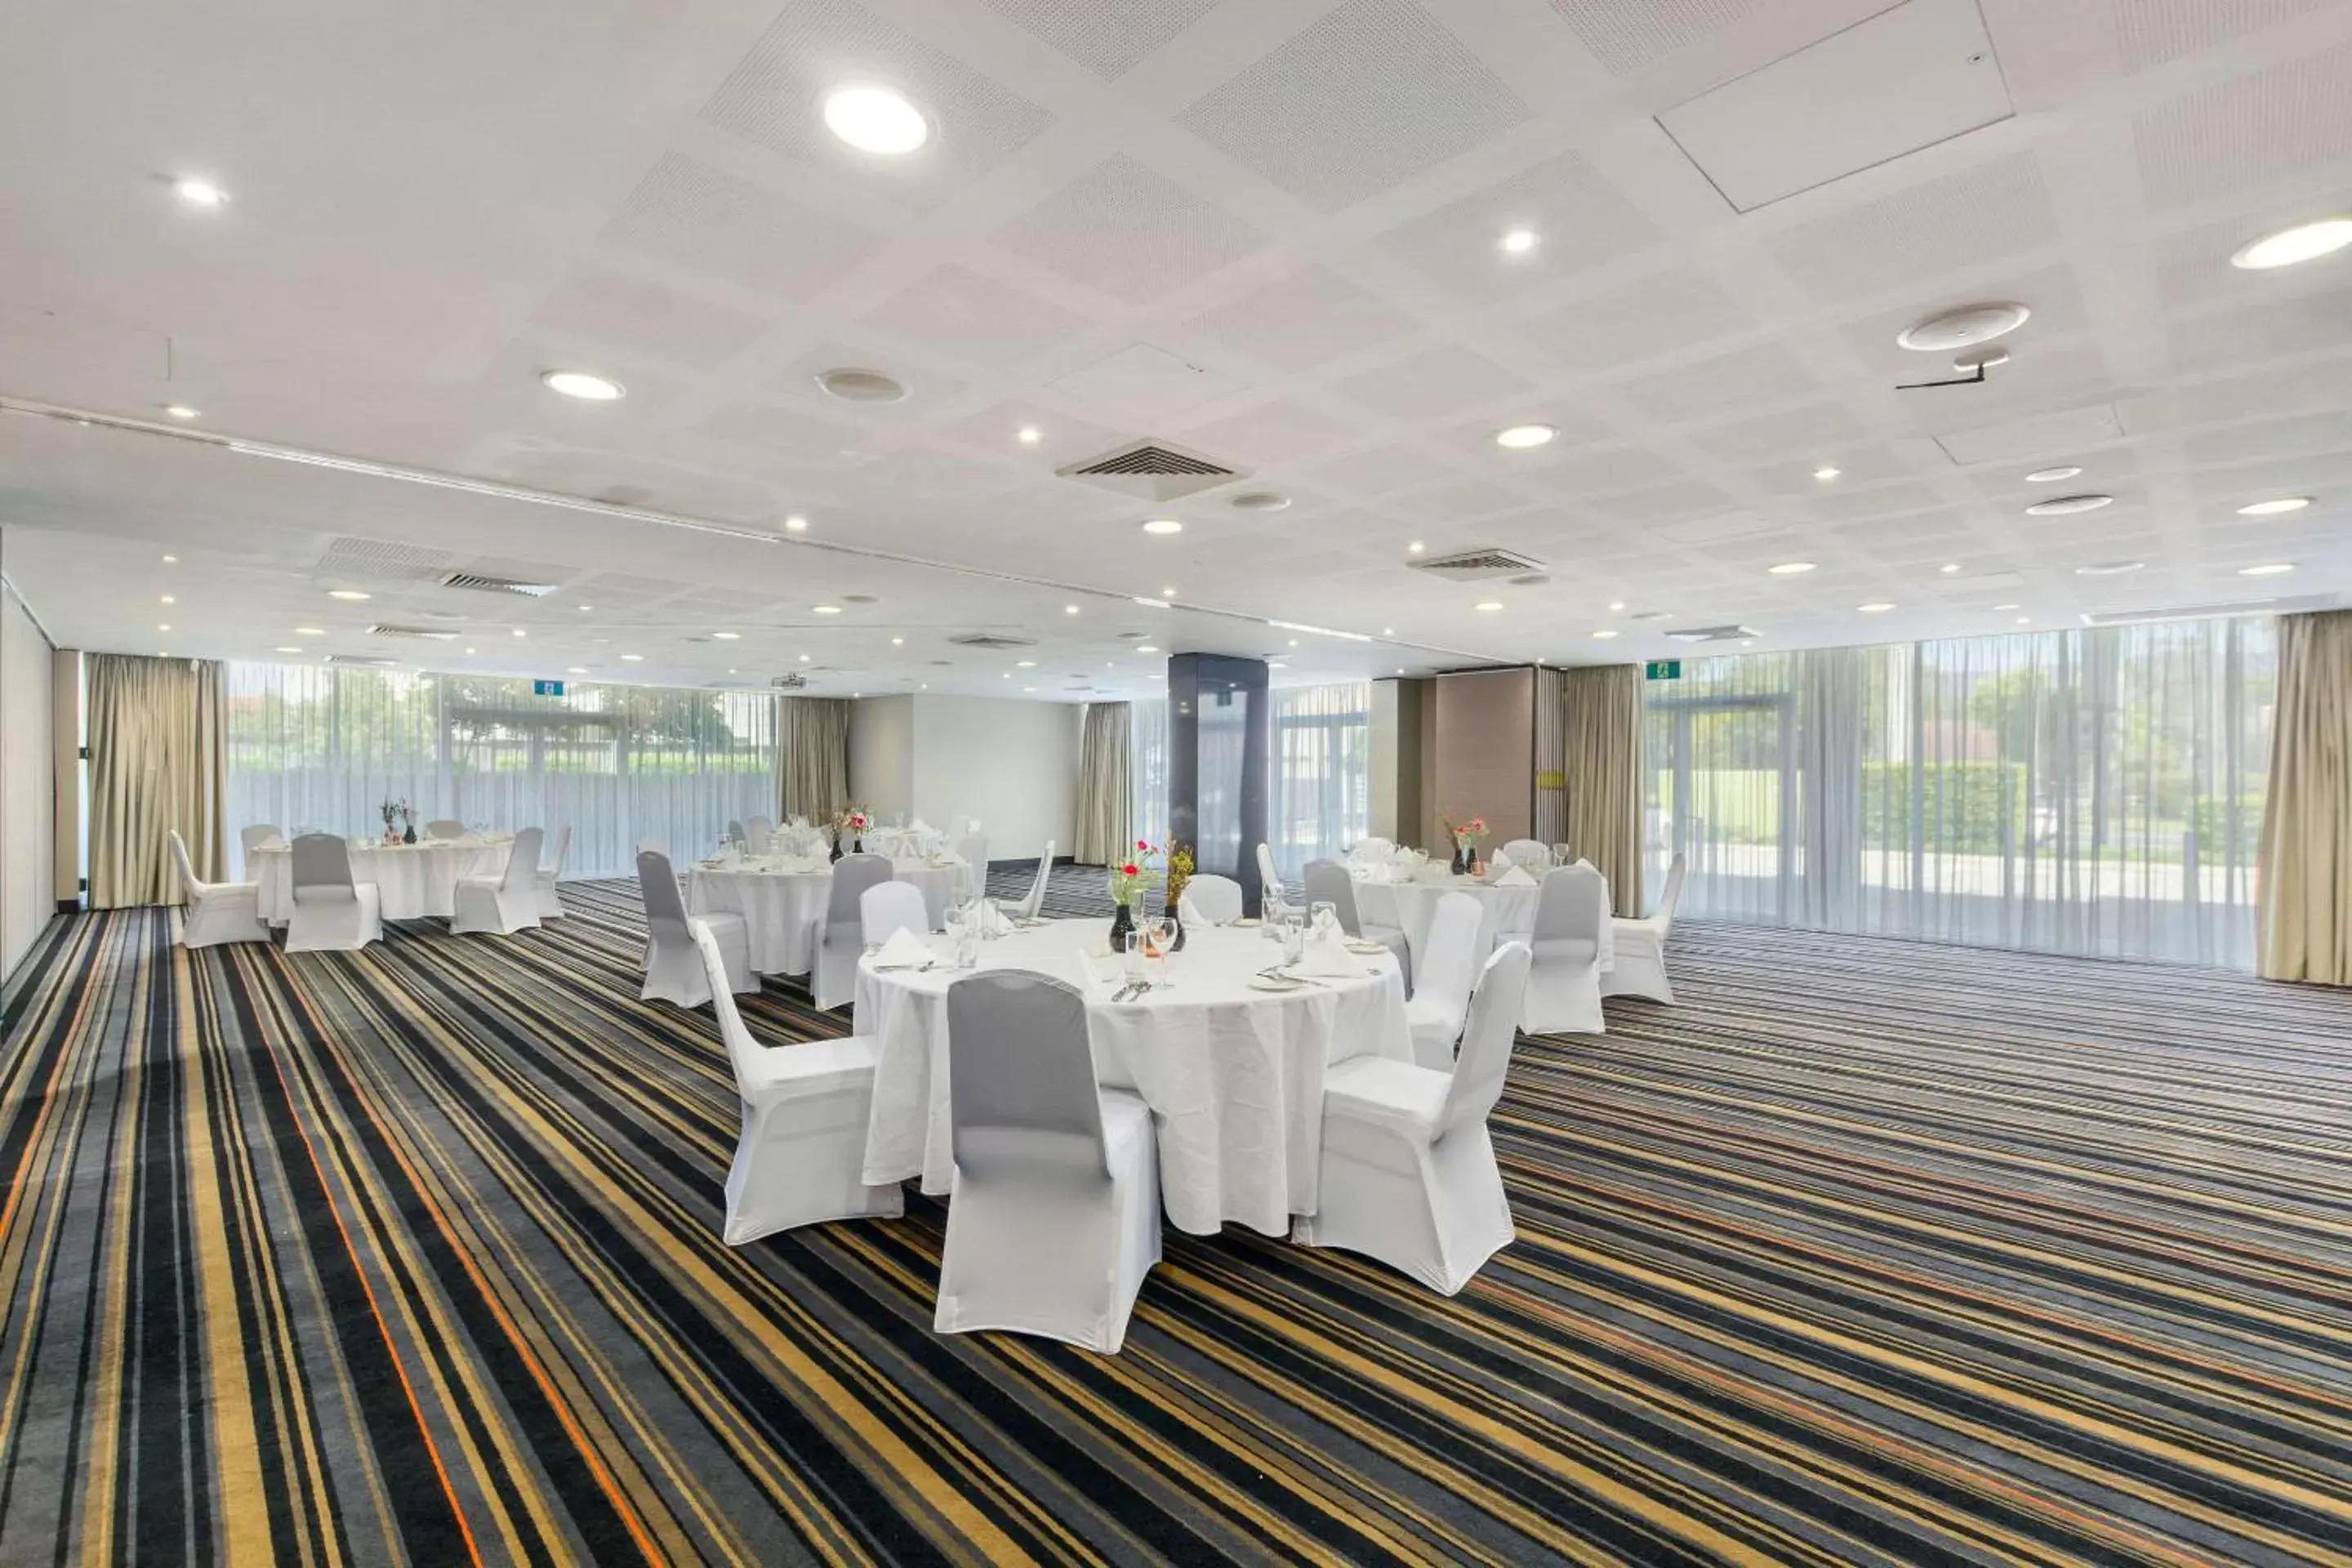 On site, Banquet Facilities in Quality Suites Pioneer Sands